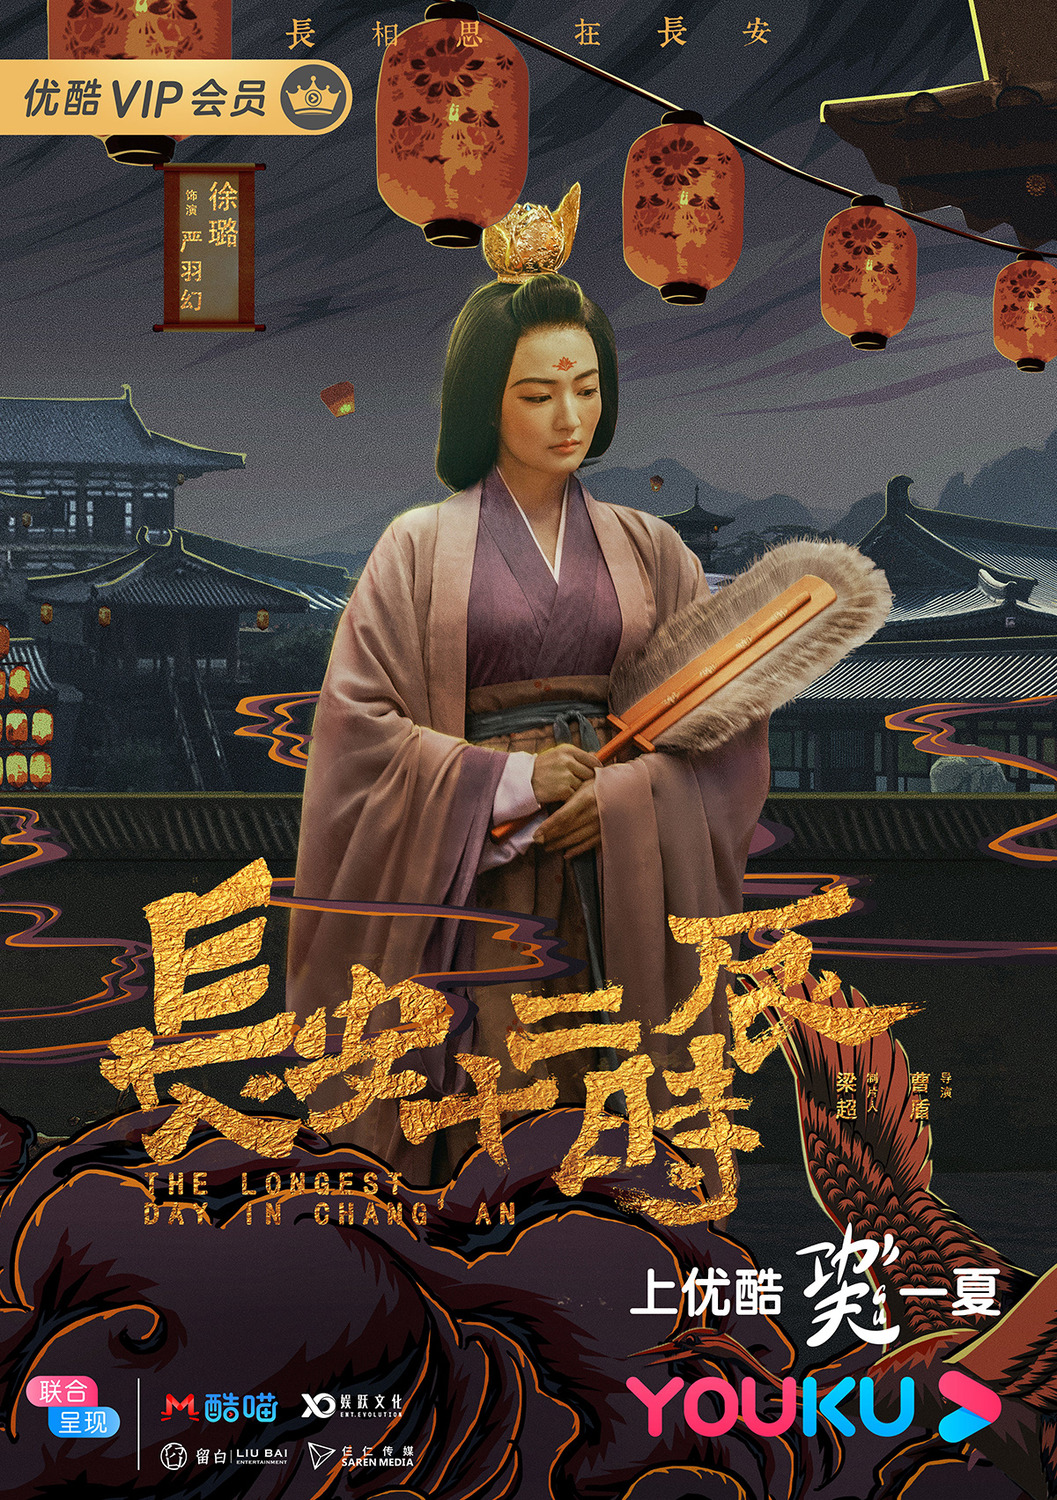 Extra Large TV Poster Image for Chang'an shi er shi chen (#16 of 18)